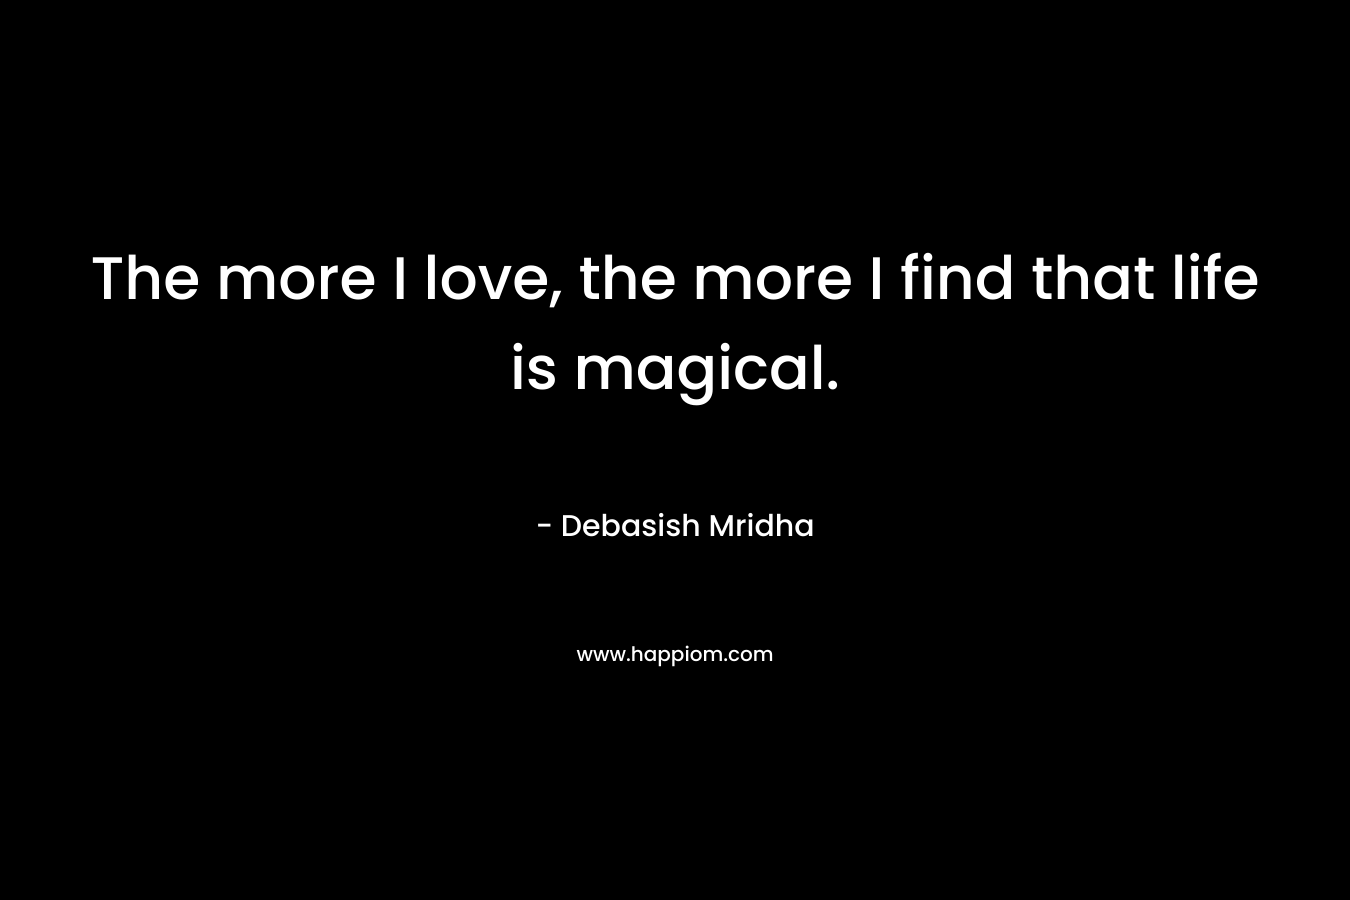 The more I love, the more I find that life is magical.